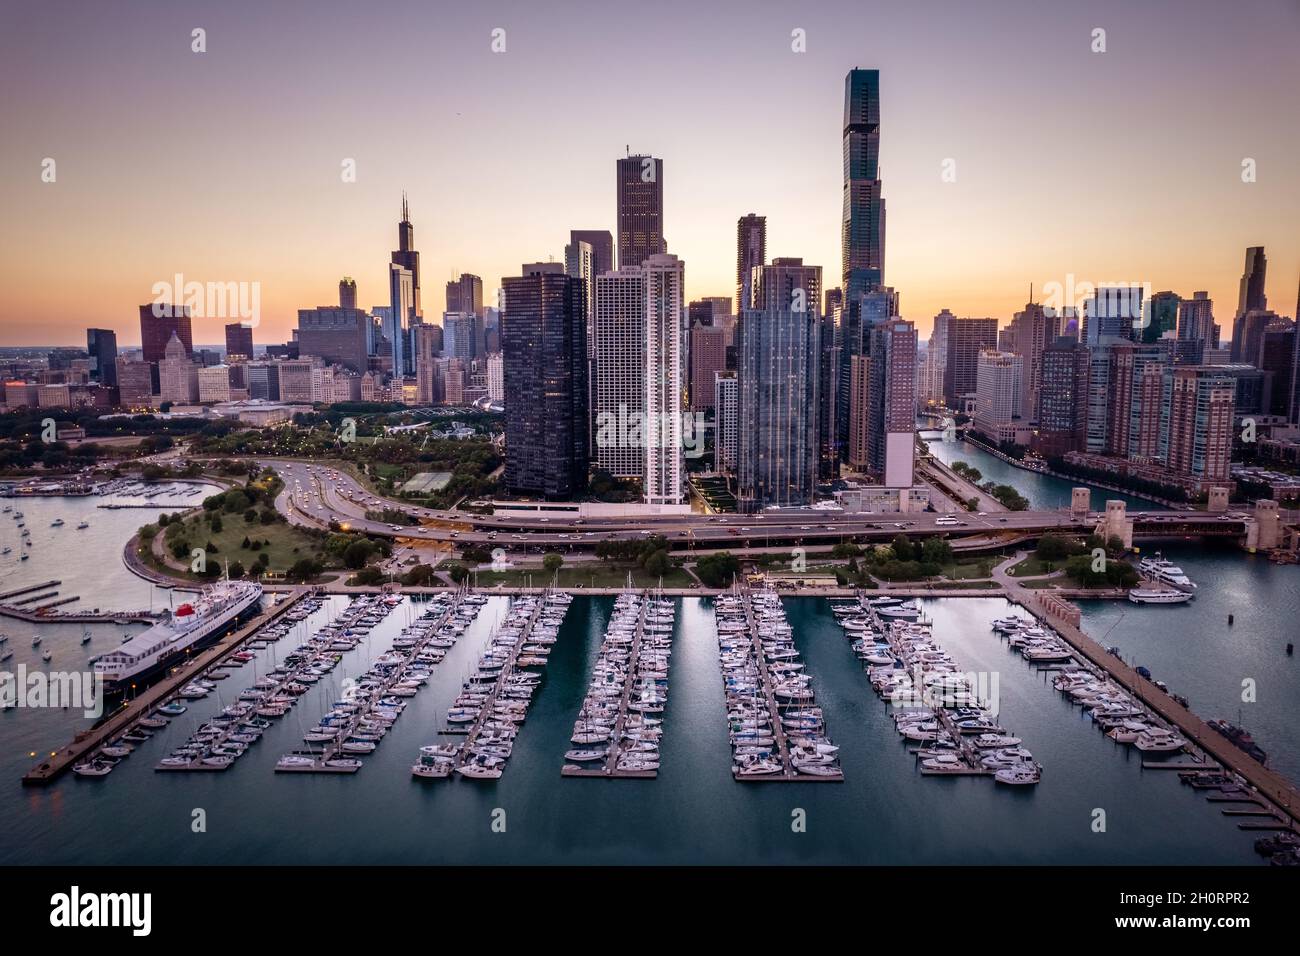 Aerial view of city skyline and boats in marina at sunset, Chicago, Illinois, USA Stock Photo